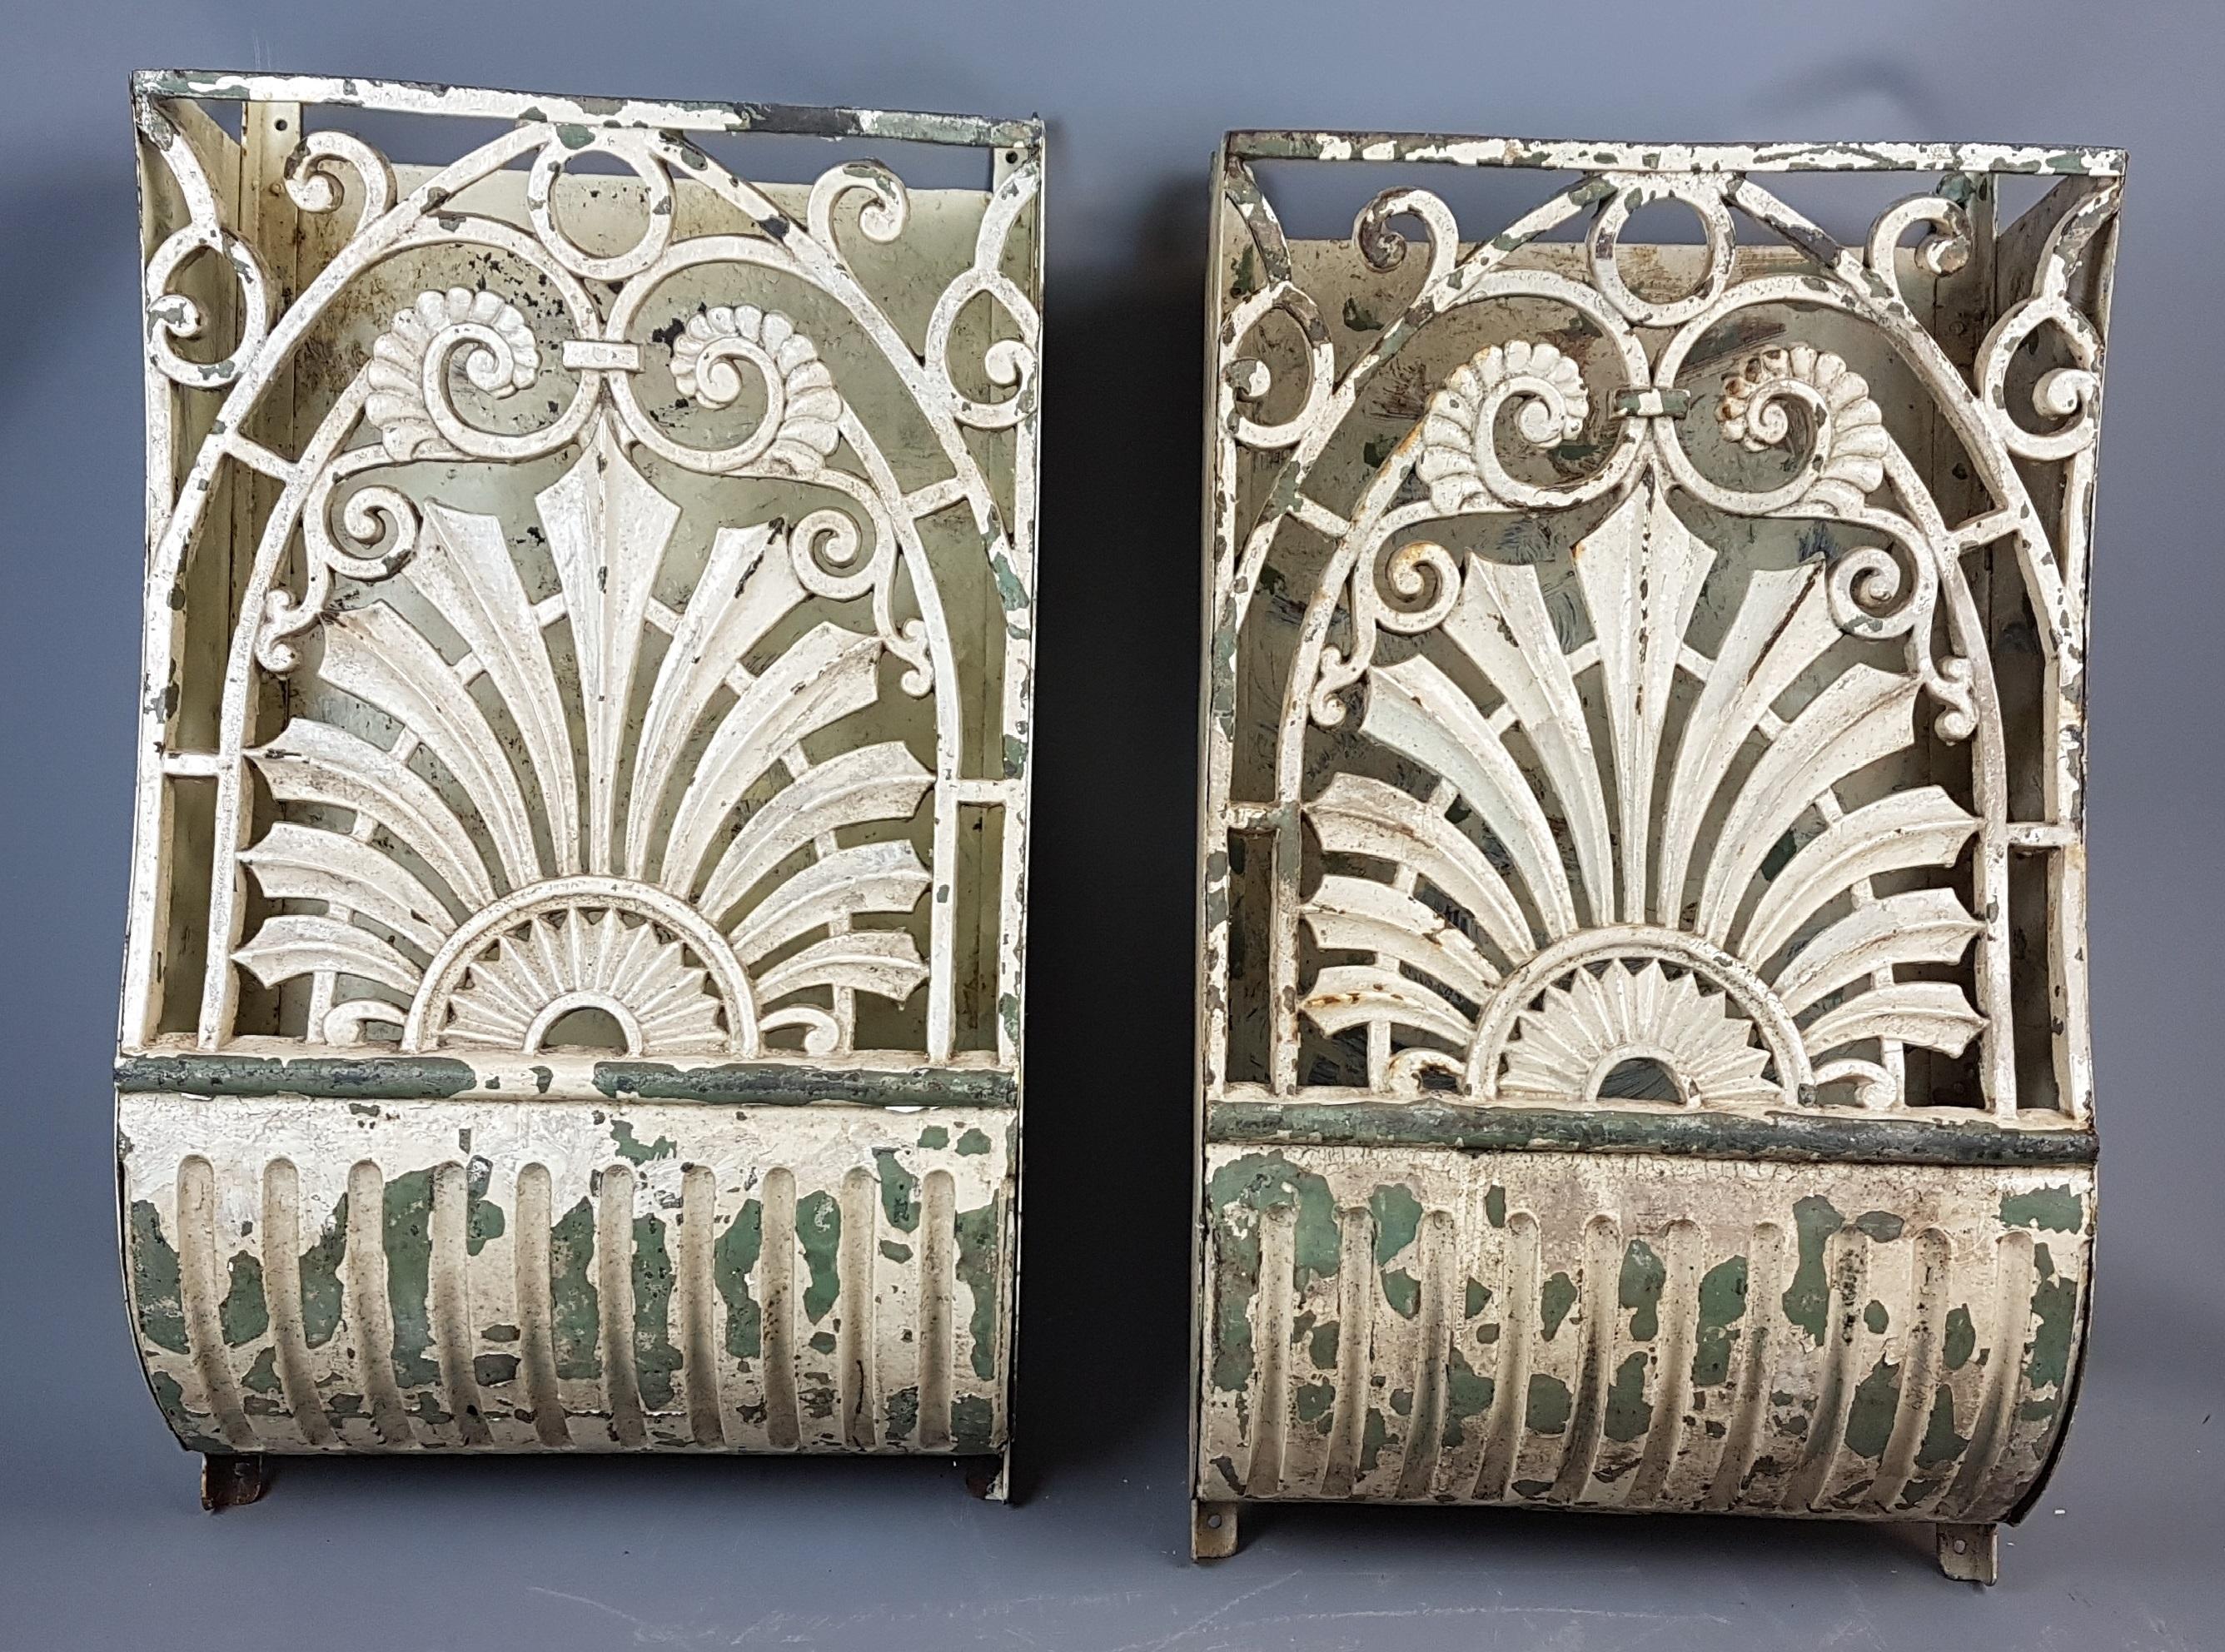 This is a great and very decorative pair of 19th century cast iron wall-mounted pockets that are perfect for unique consoles with lighting inside.

They have layers of old paint that has given them a desirable appearance with the base layer being